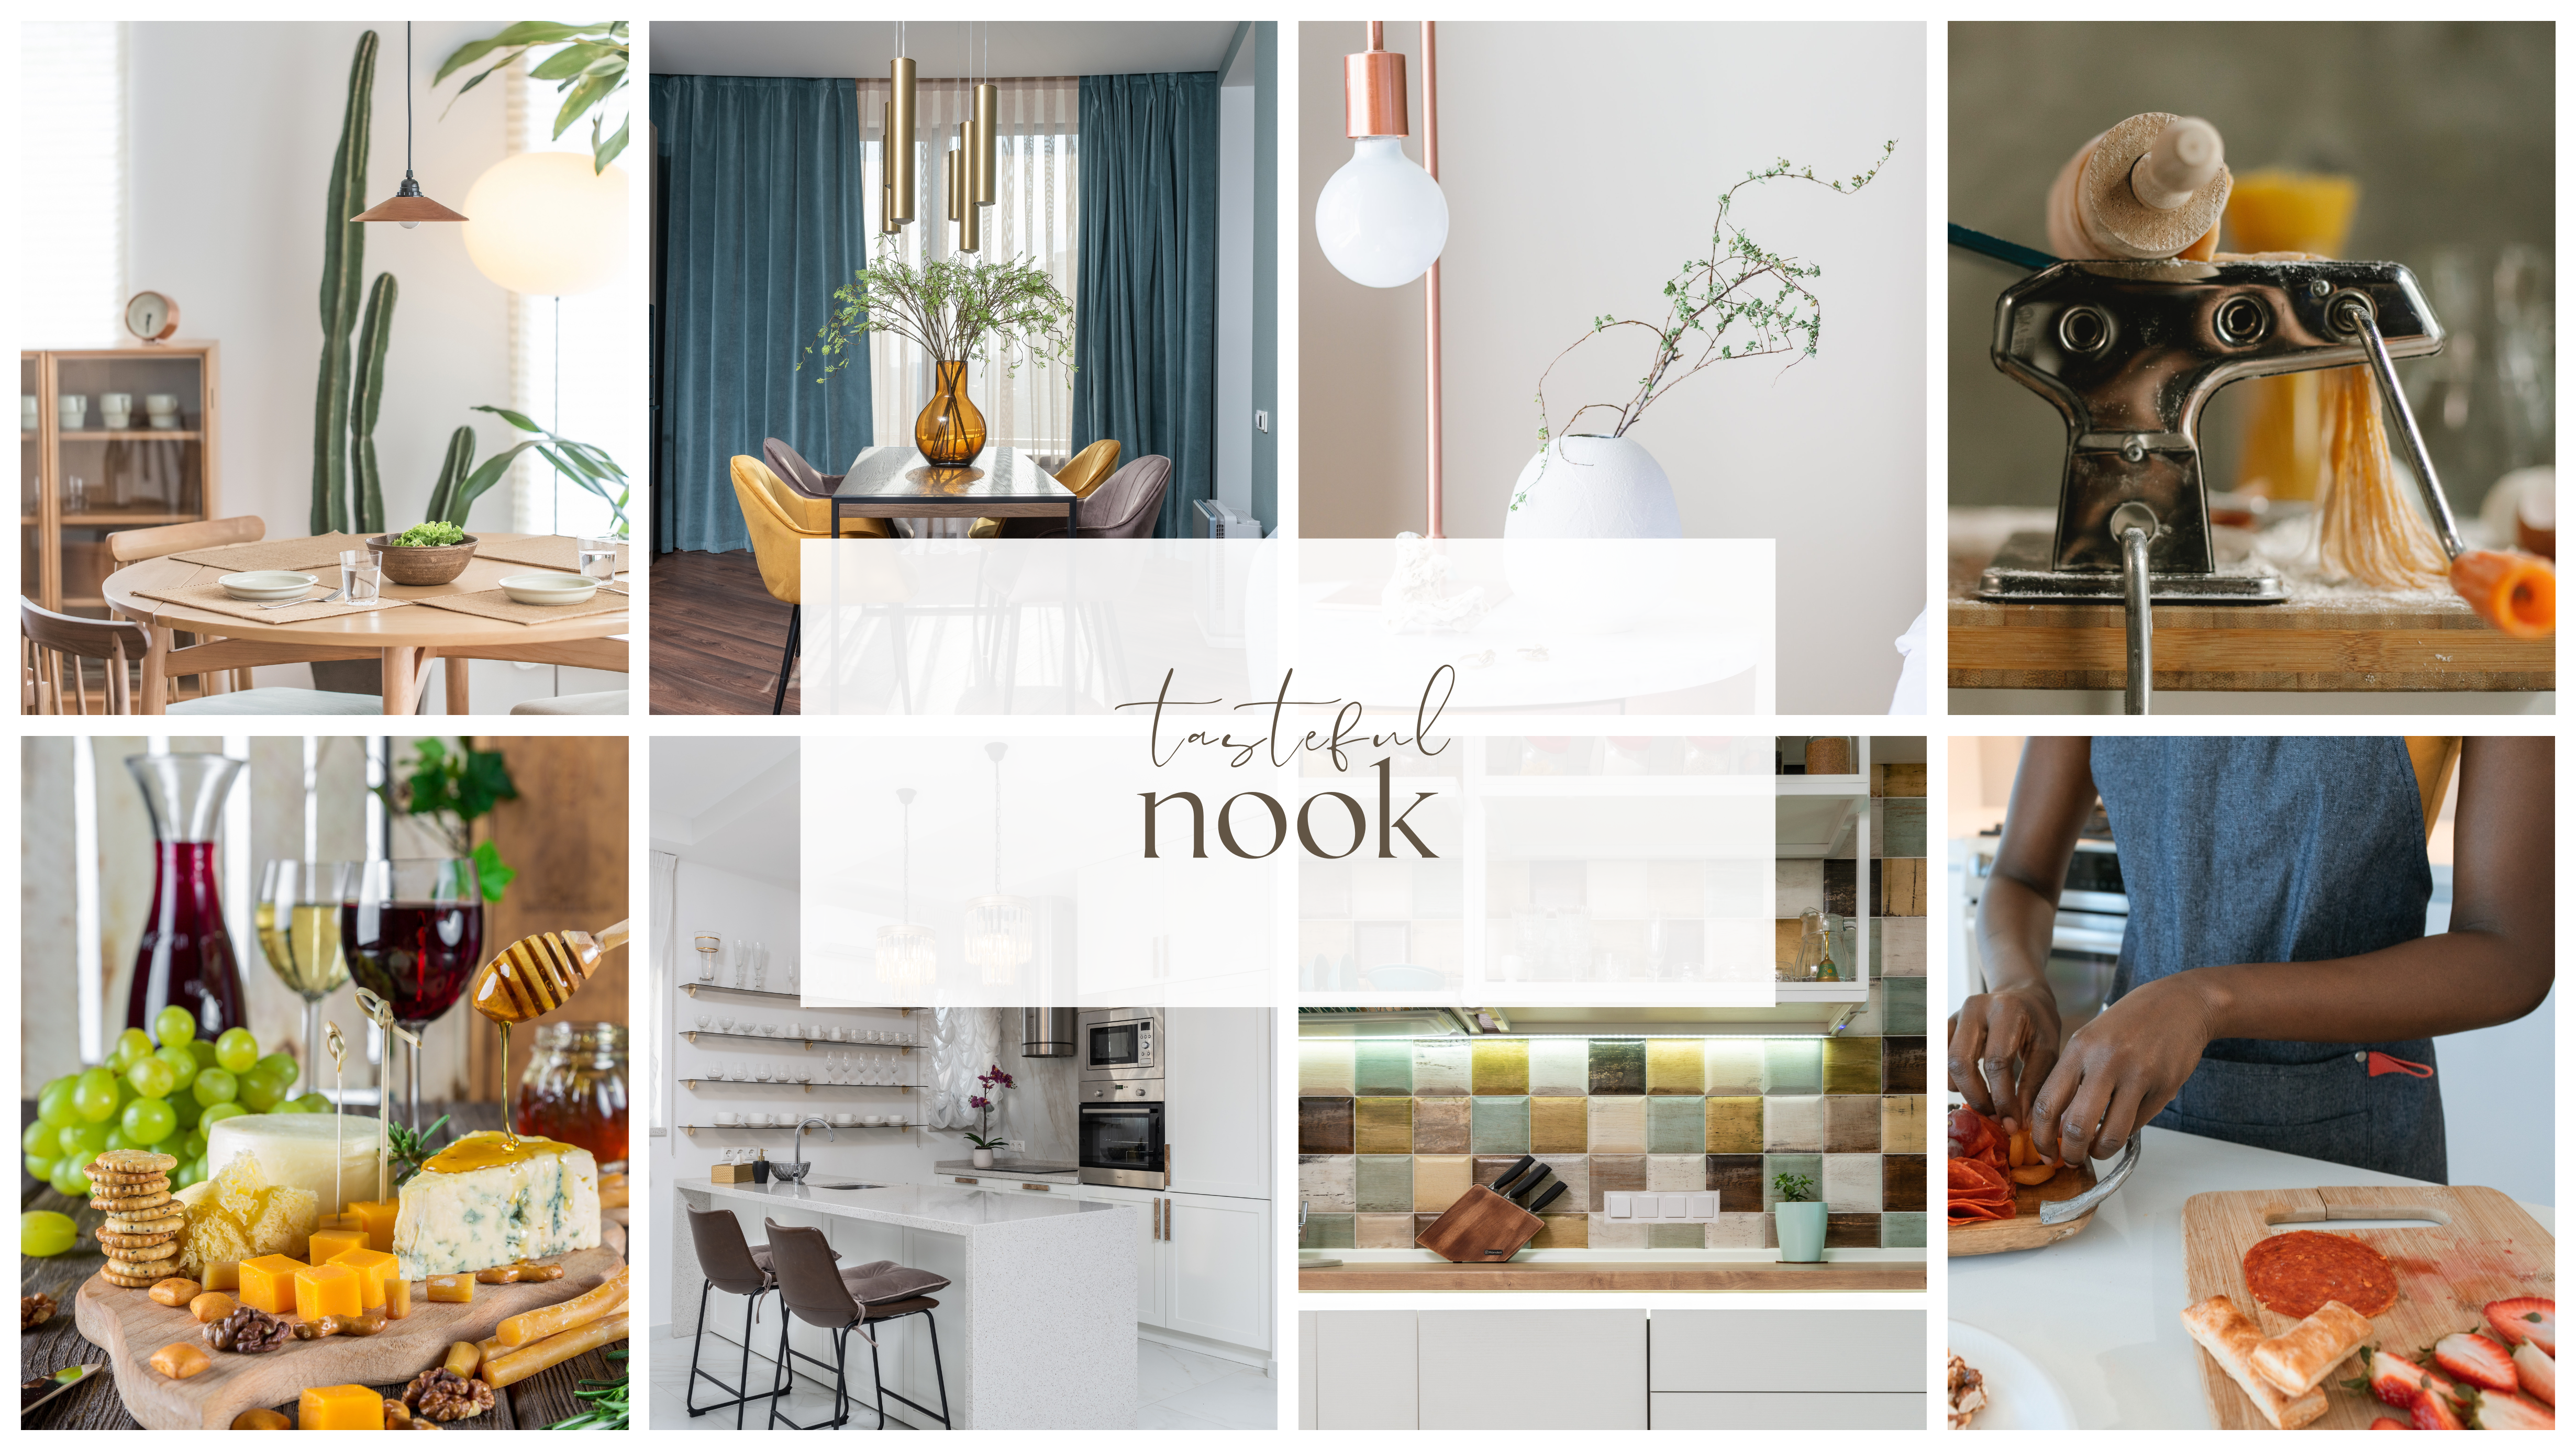 A coolage of attractive photos showing modern kitchen and home decor. Earth tones, deep blues and whites are featured.